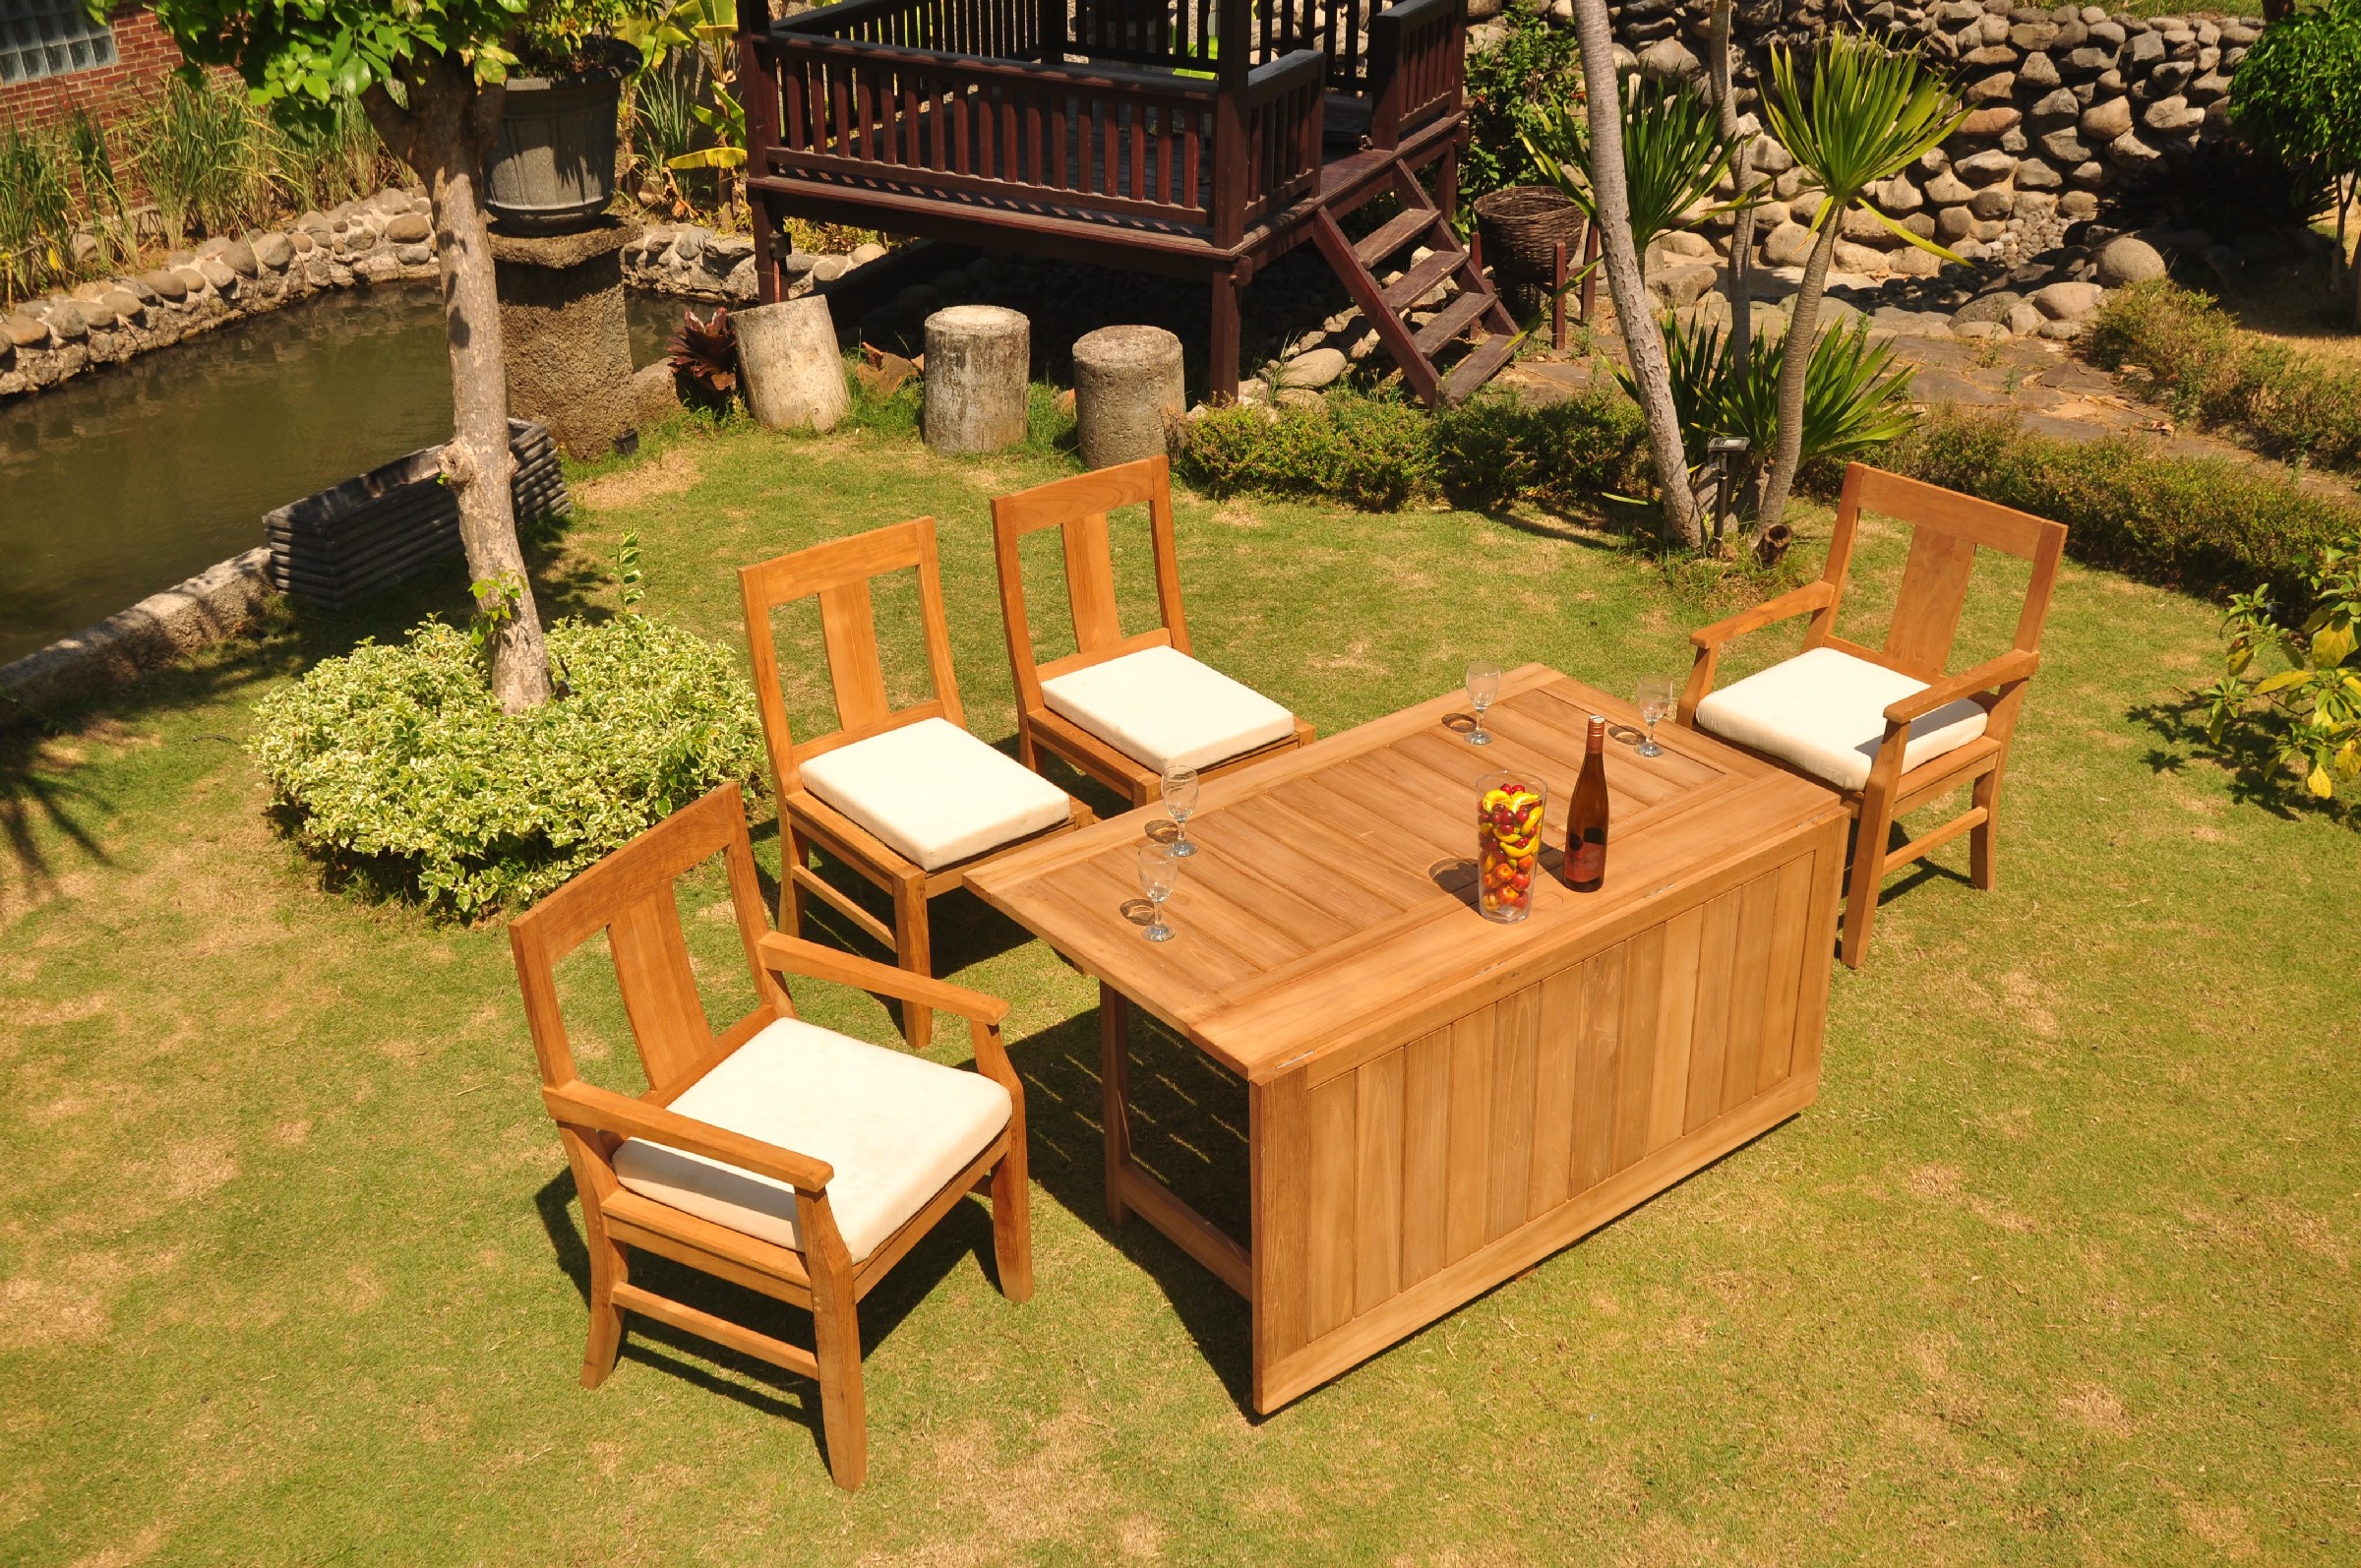 Grade-A Teak Dining Set: 4 Seater 5 Pc: 60" Square Rectangle Butterfly Table And 4 Osborne Chairs (2 Arm & 2 Armless Chairs) WholesaleTeak #51OS1405 - image 5 of 6